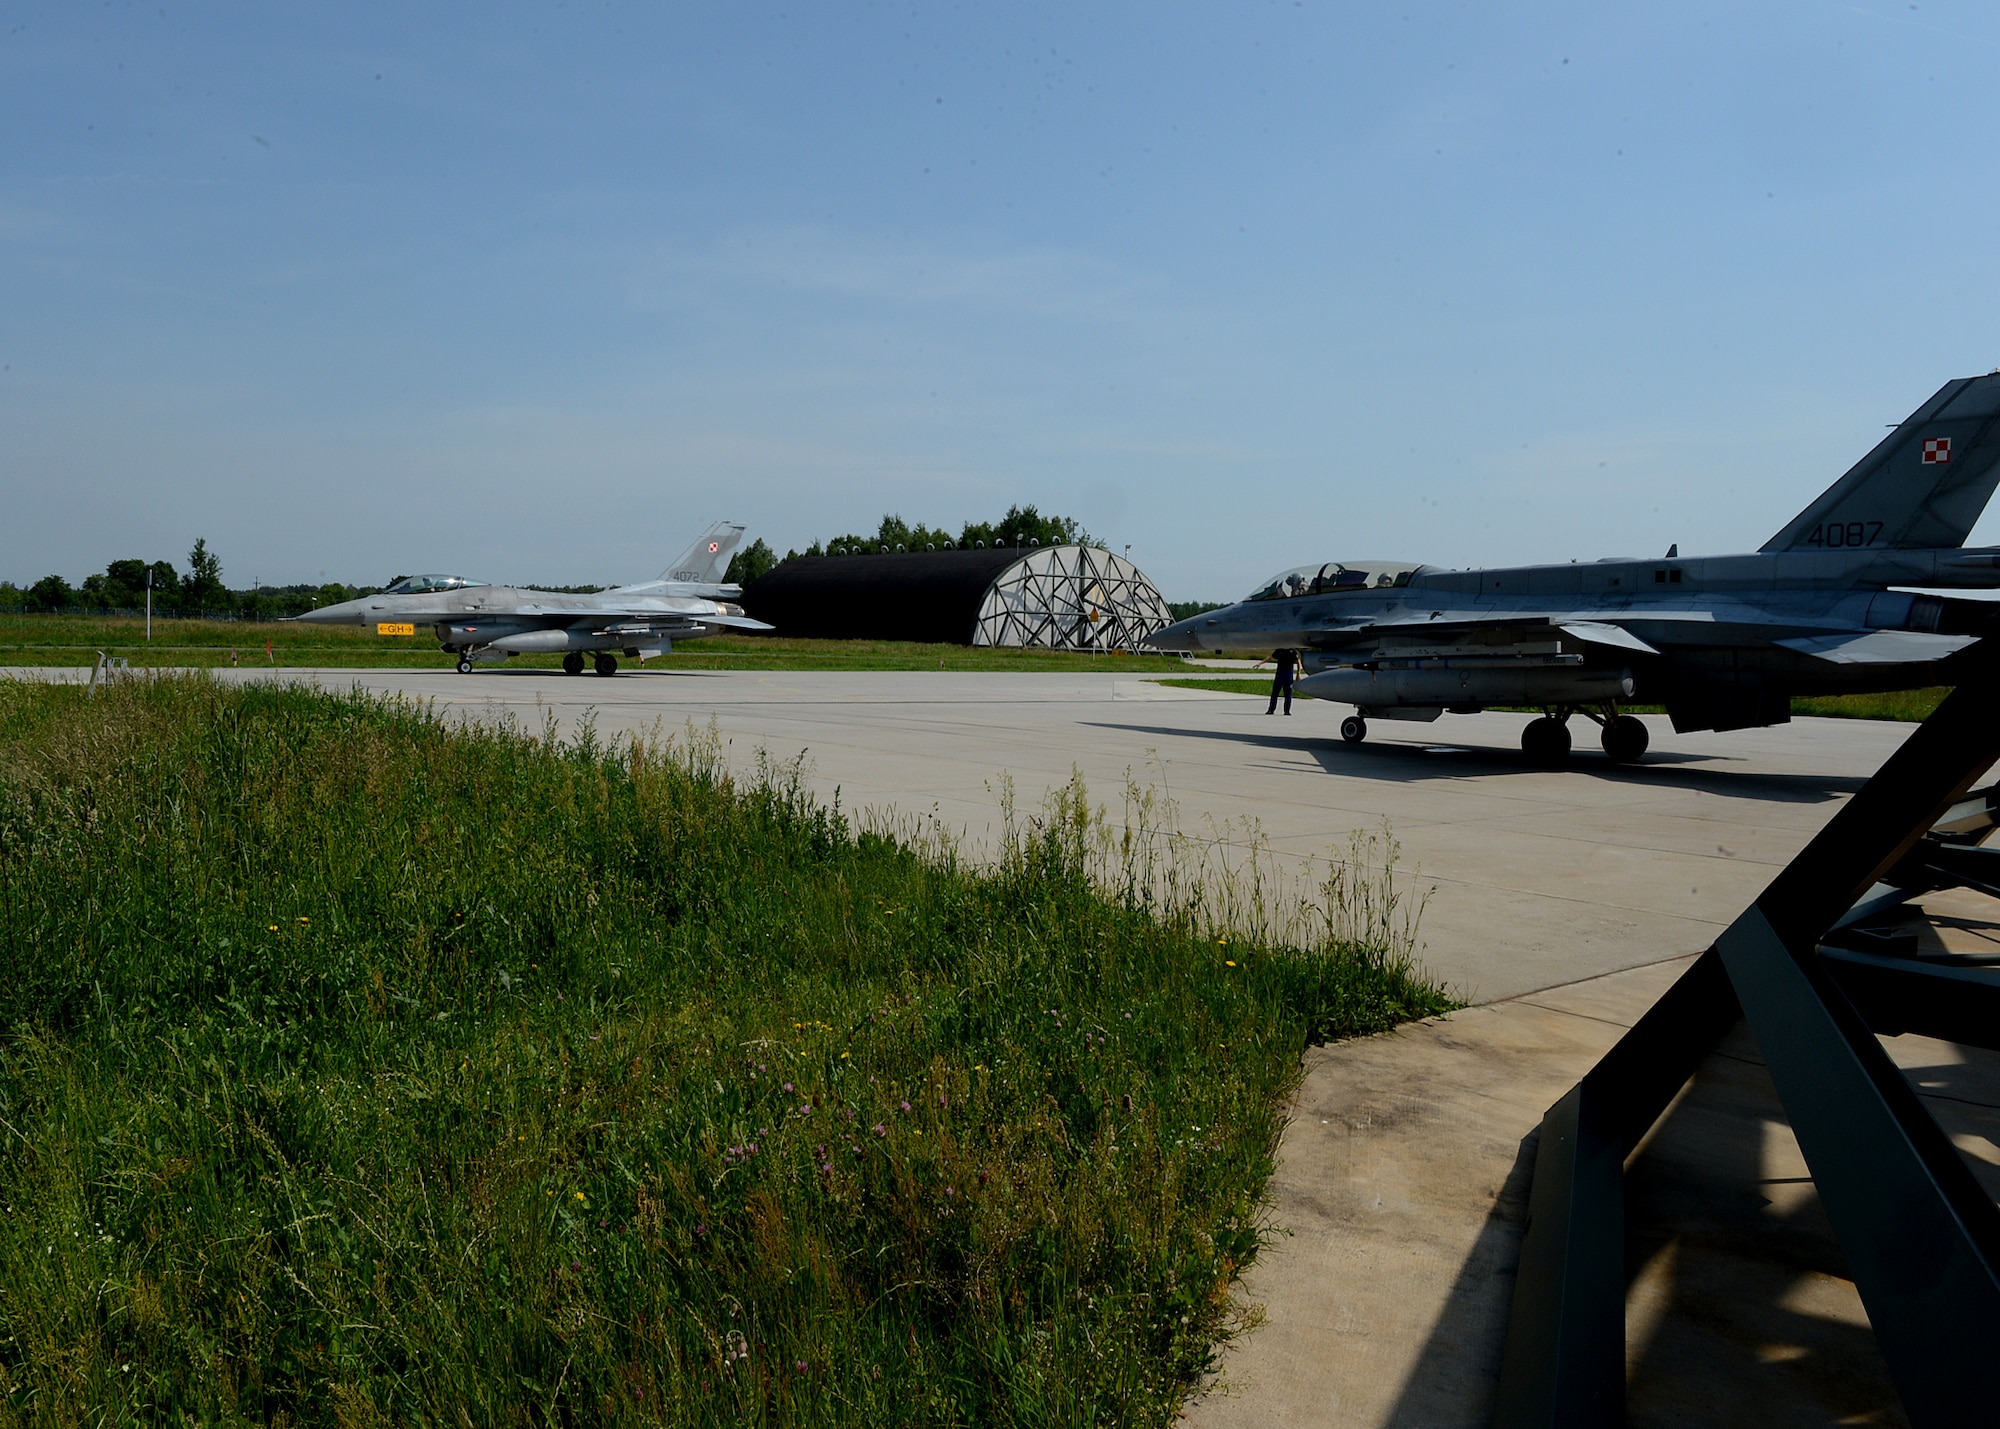 A Polish air force F-16 Fighting Falcon fighter aircraft, left, waits for another aircraft to pass before departure from Lask Air Base, Poland, June 10, 2014. Both aircraft departed to participate in exercise EAGLE TALON with NATO partners. This exercise is similar to exercise RED FLAG that takes place in Nellis Air Force Base, Nev., and Eileson Air Force Base, Ala., which provides aerial combat tactics training in a combined environment. (U.S. Air Force photo by Airman 1st Class Kyle Gese/Released)